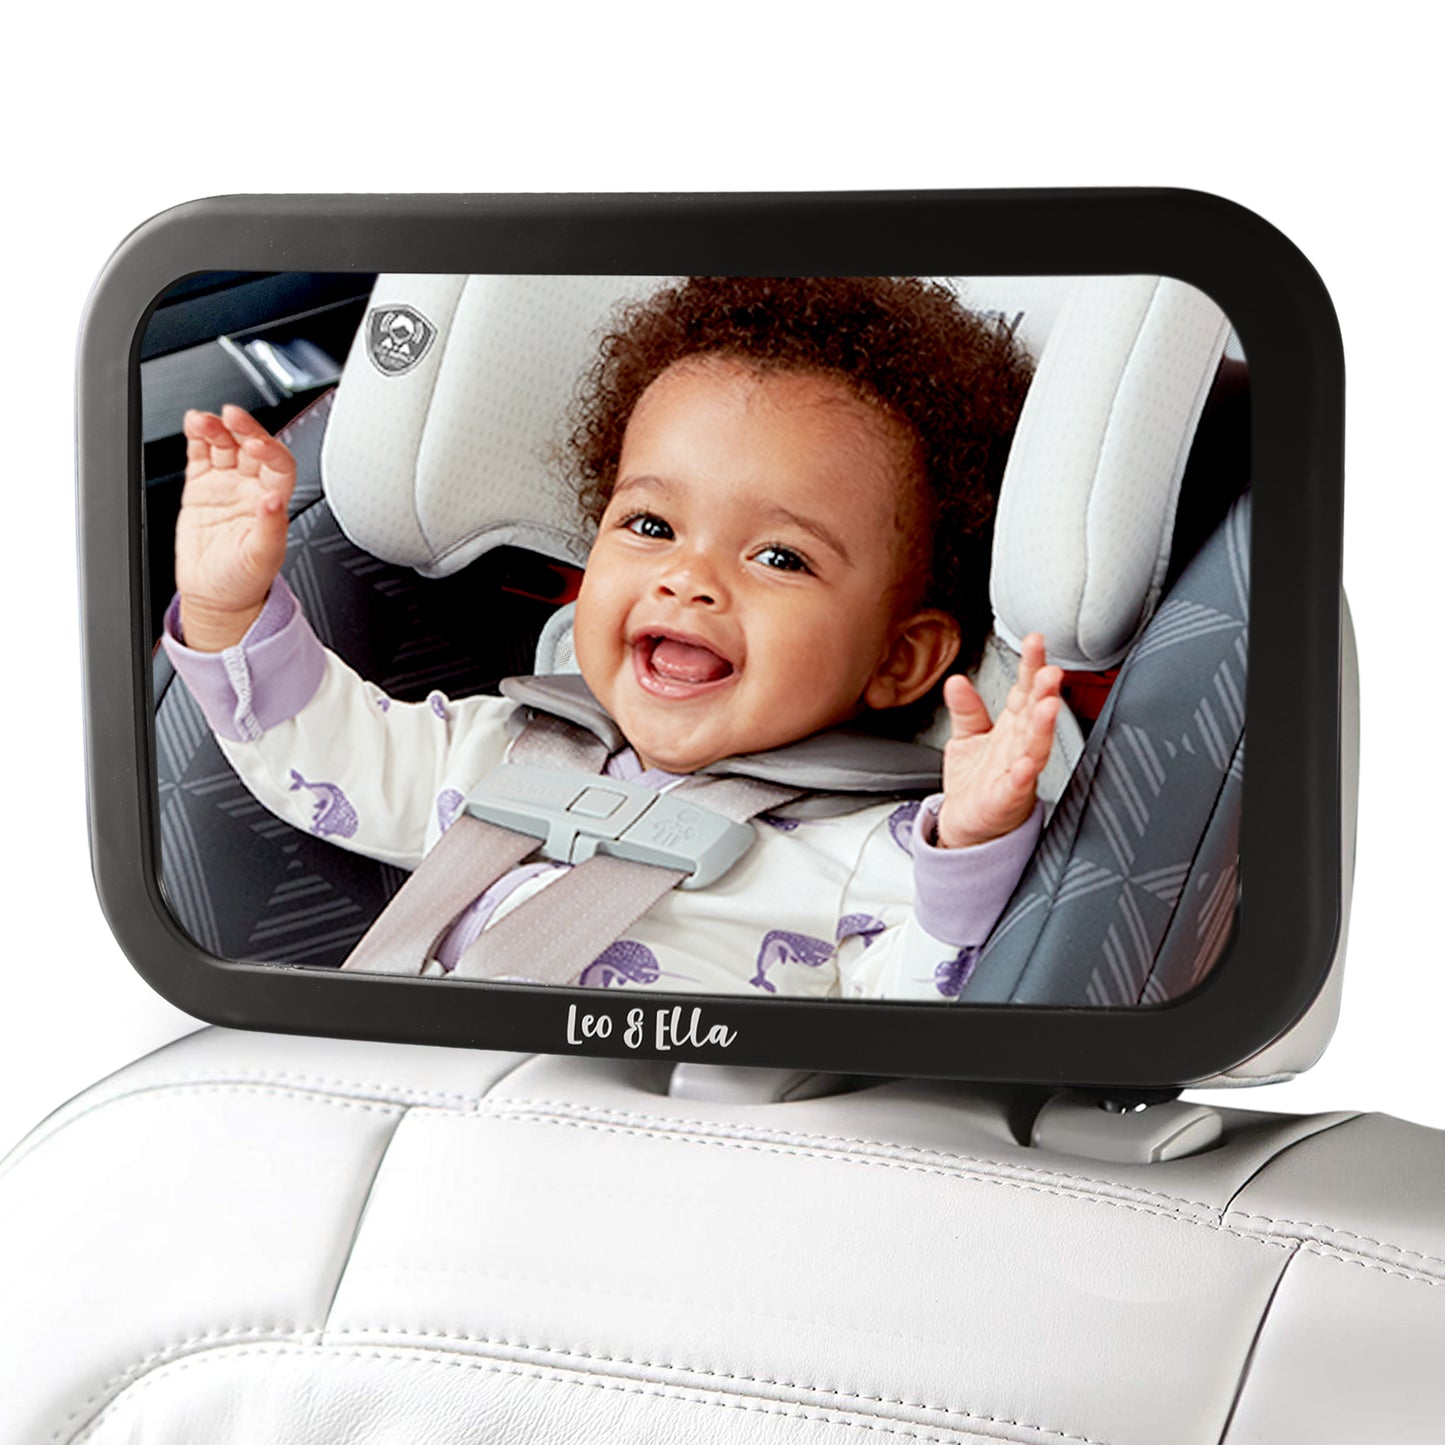 Leo&Ella Small Baby Car Mirror, Extra Wide View of Baby in Rear-Facing Carseat